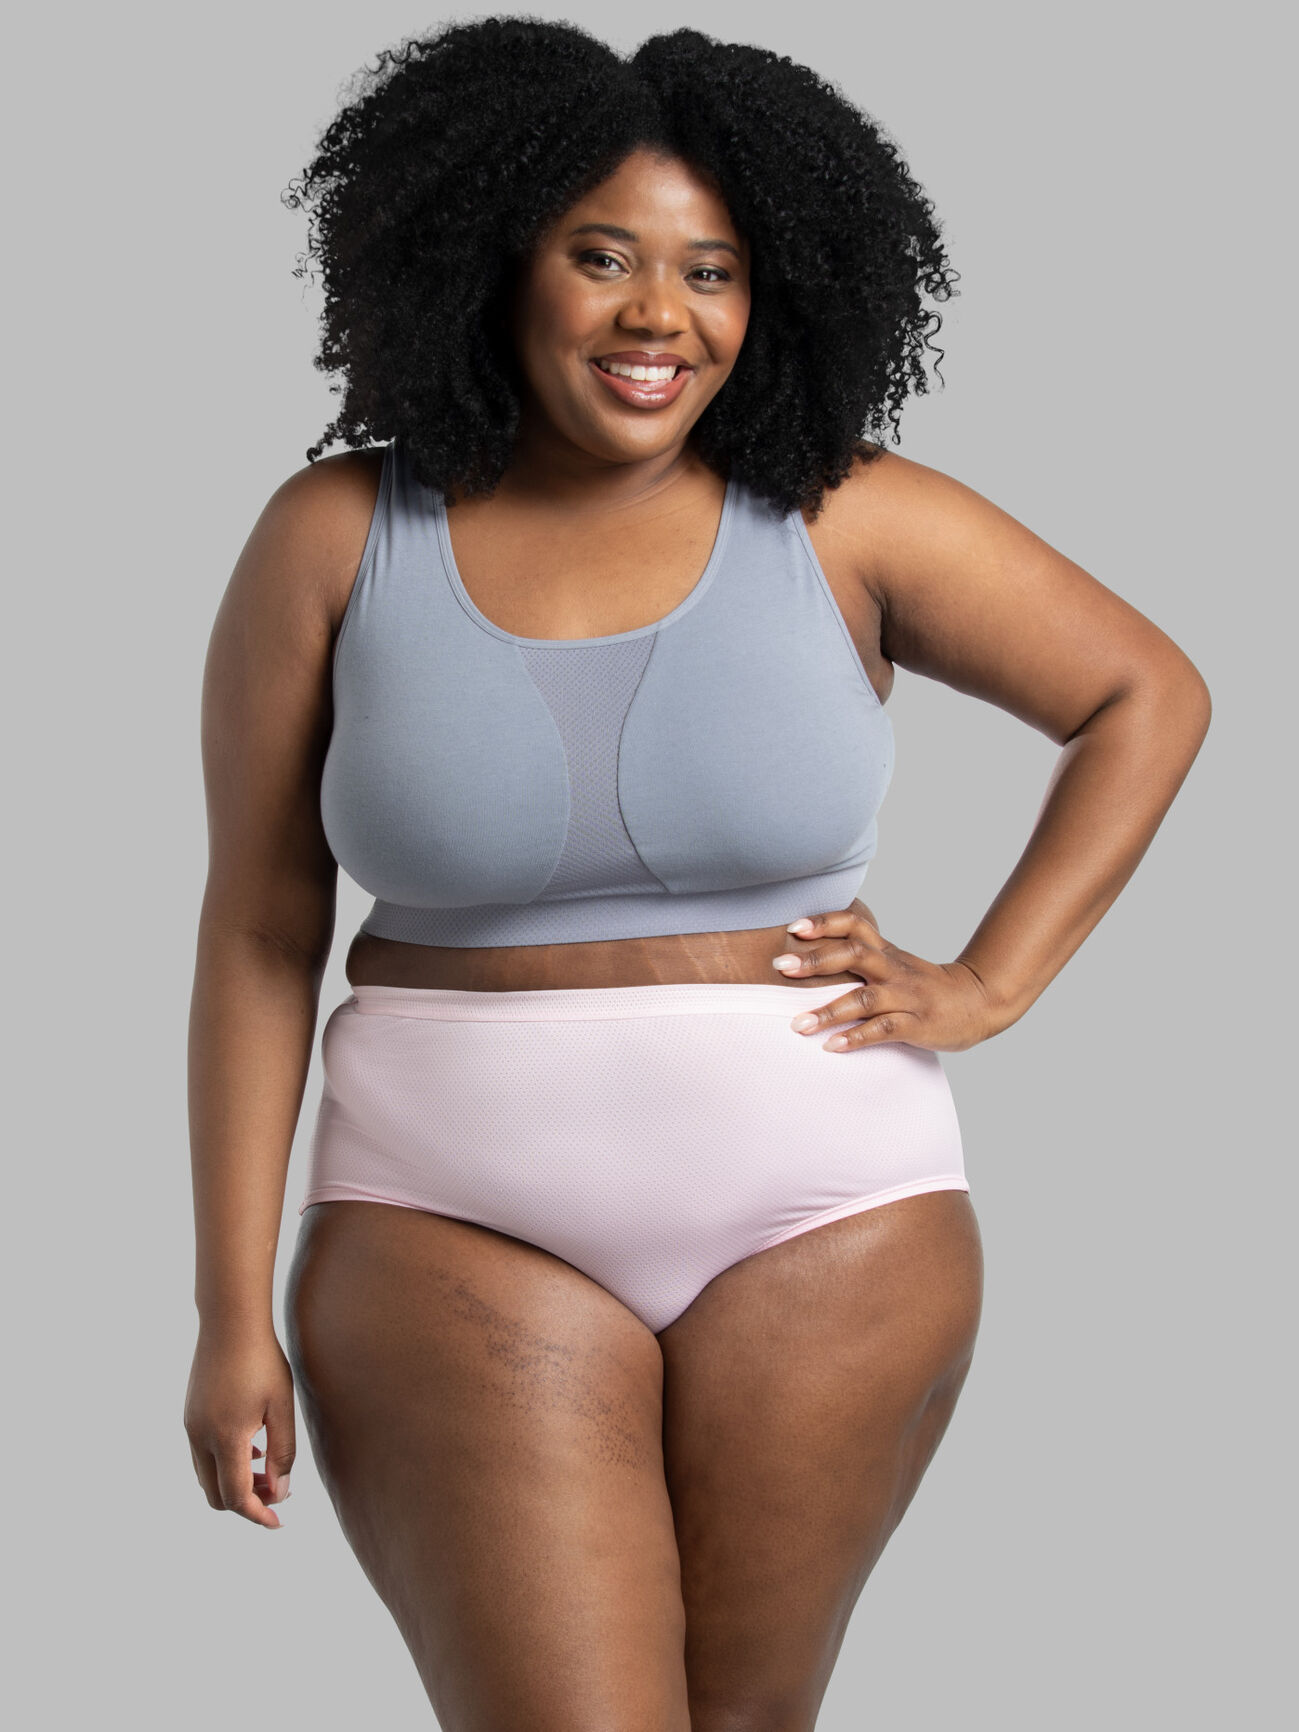 Take advantage of our $20 OFF Plus shipping FREE - Pretty Girl Curves